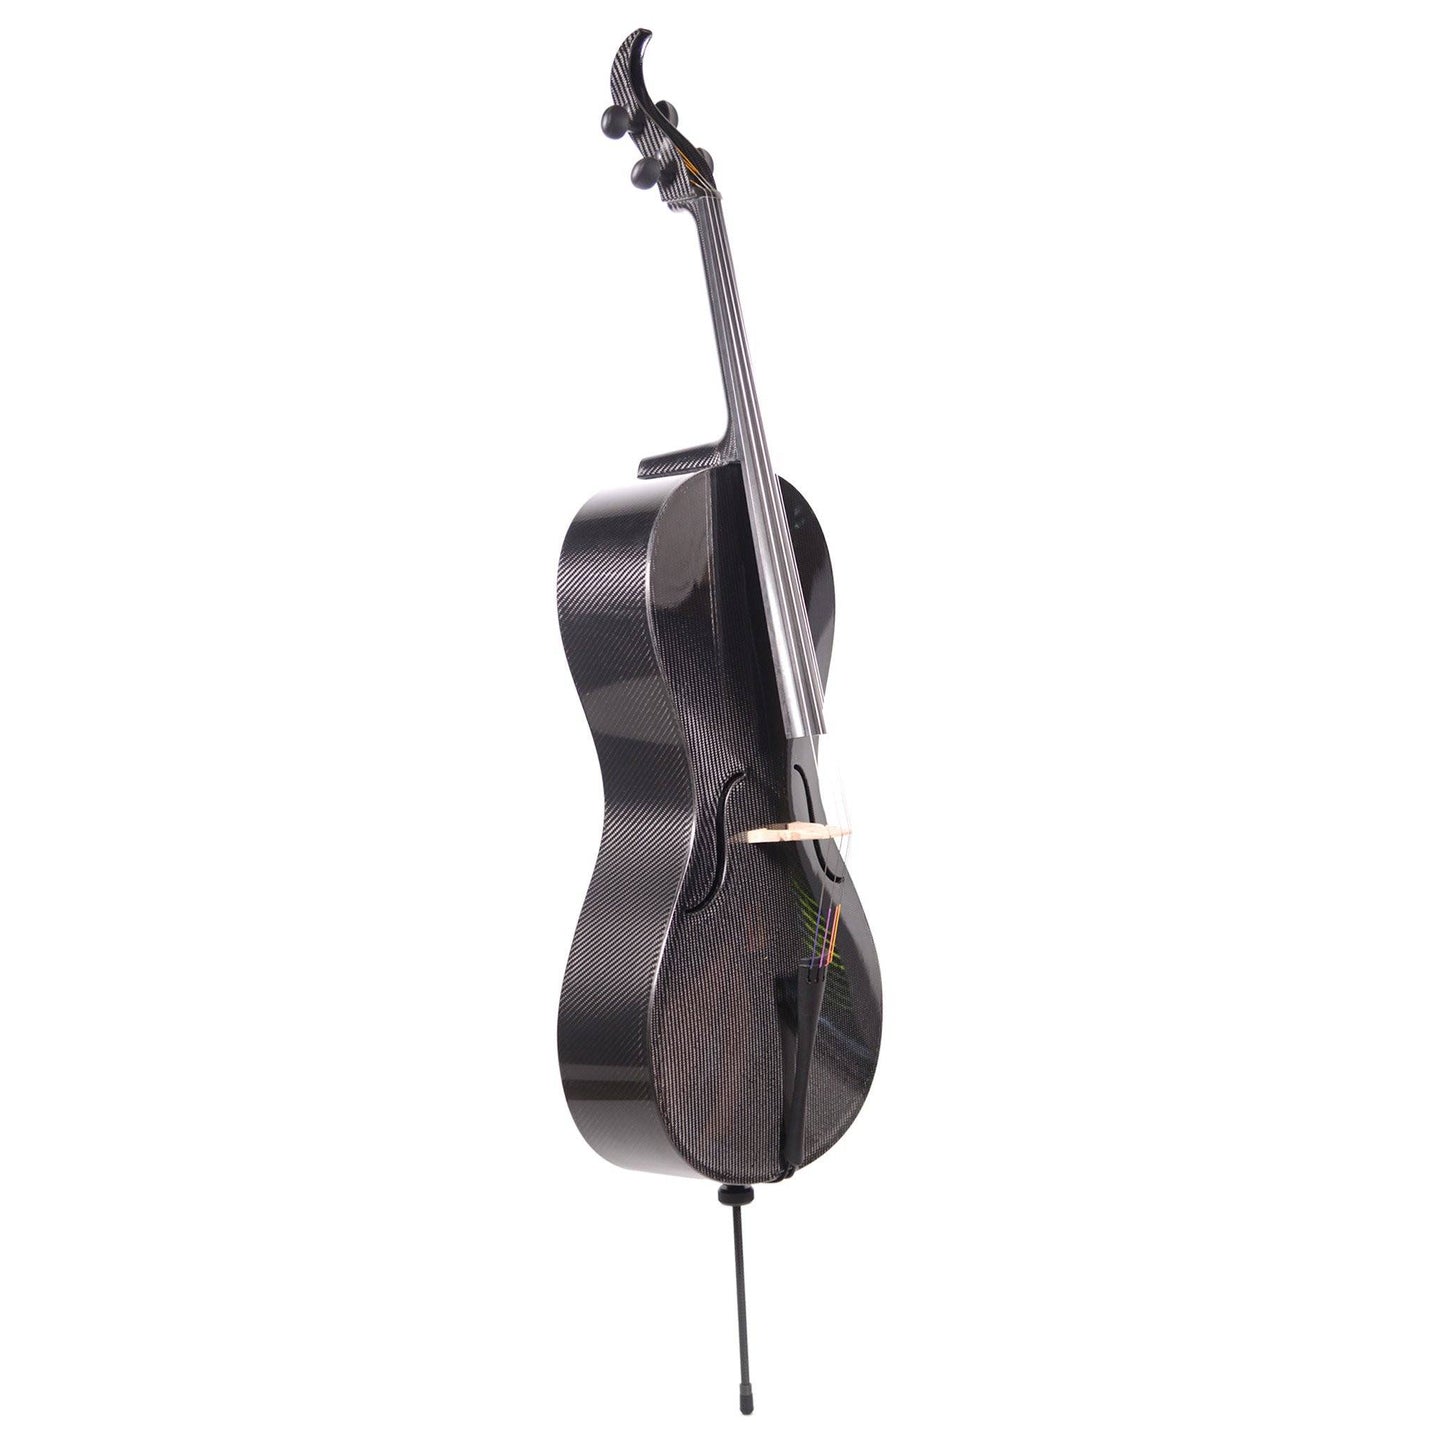 NEW! Carbon cello EvoLine made in Germany